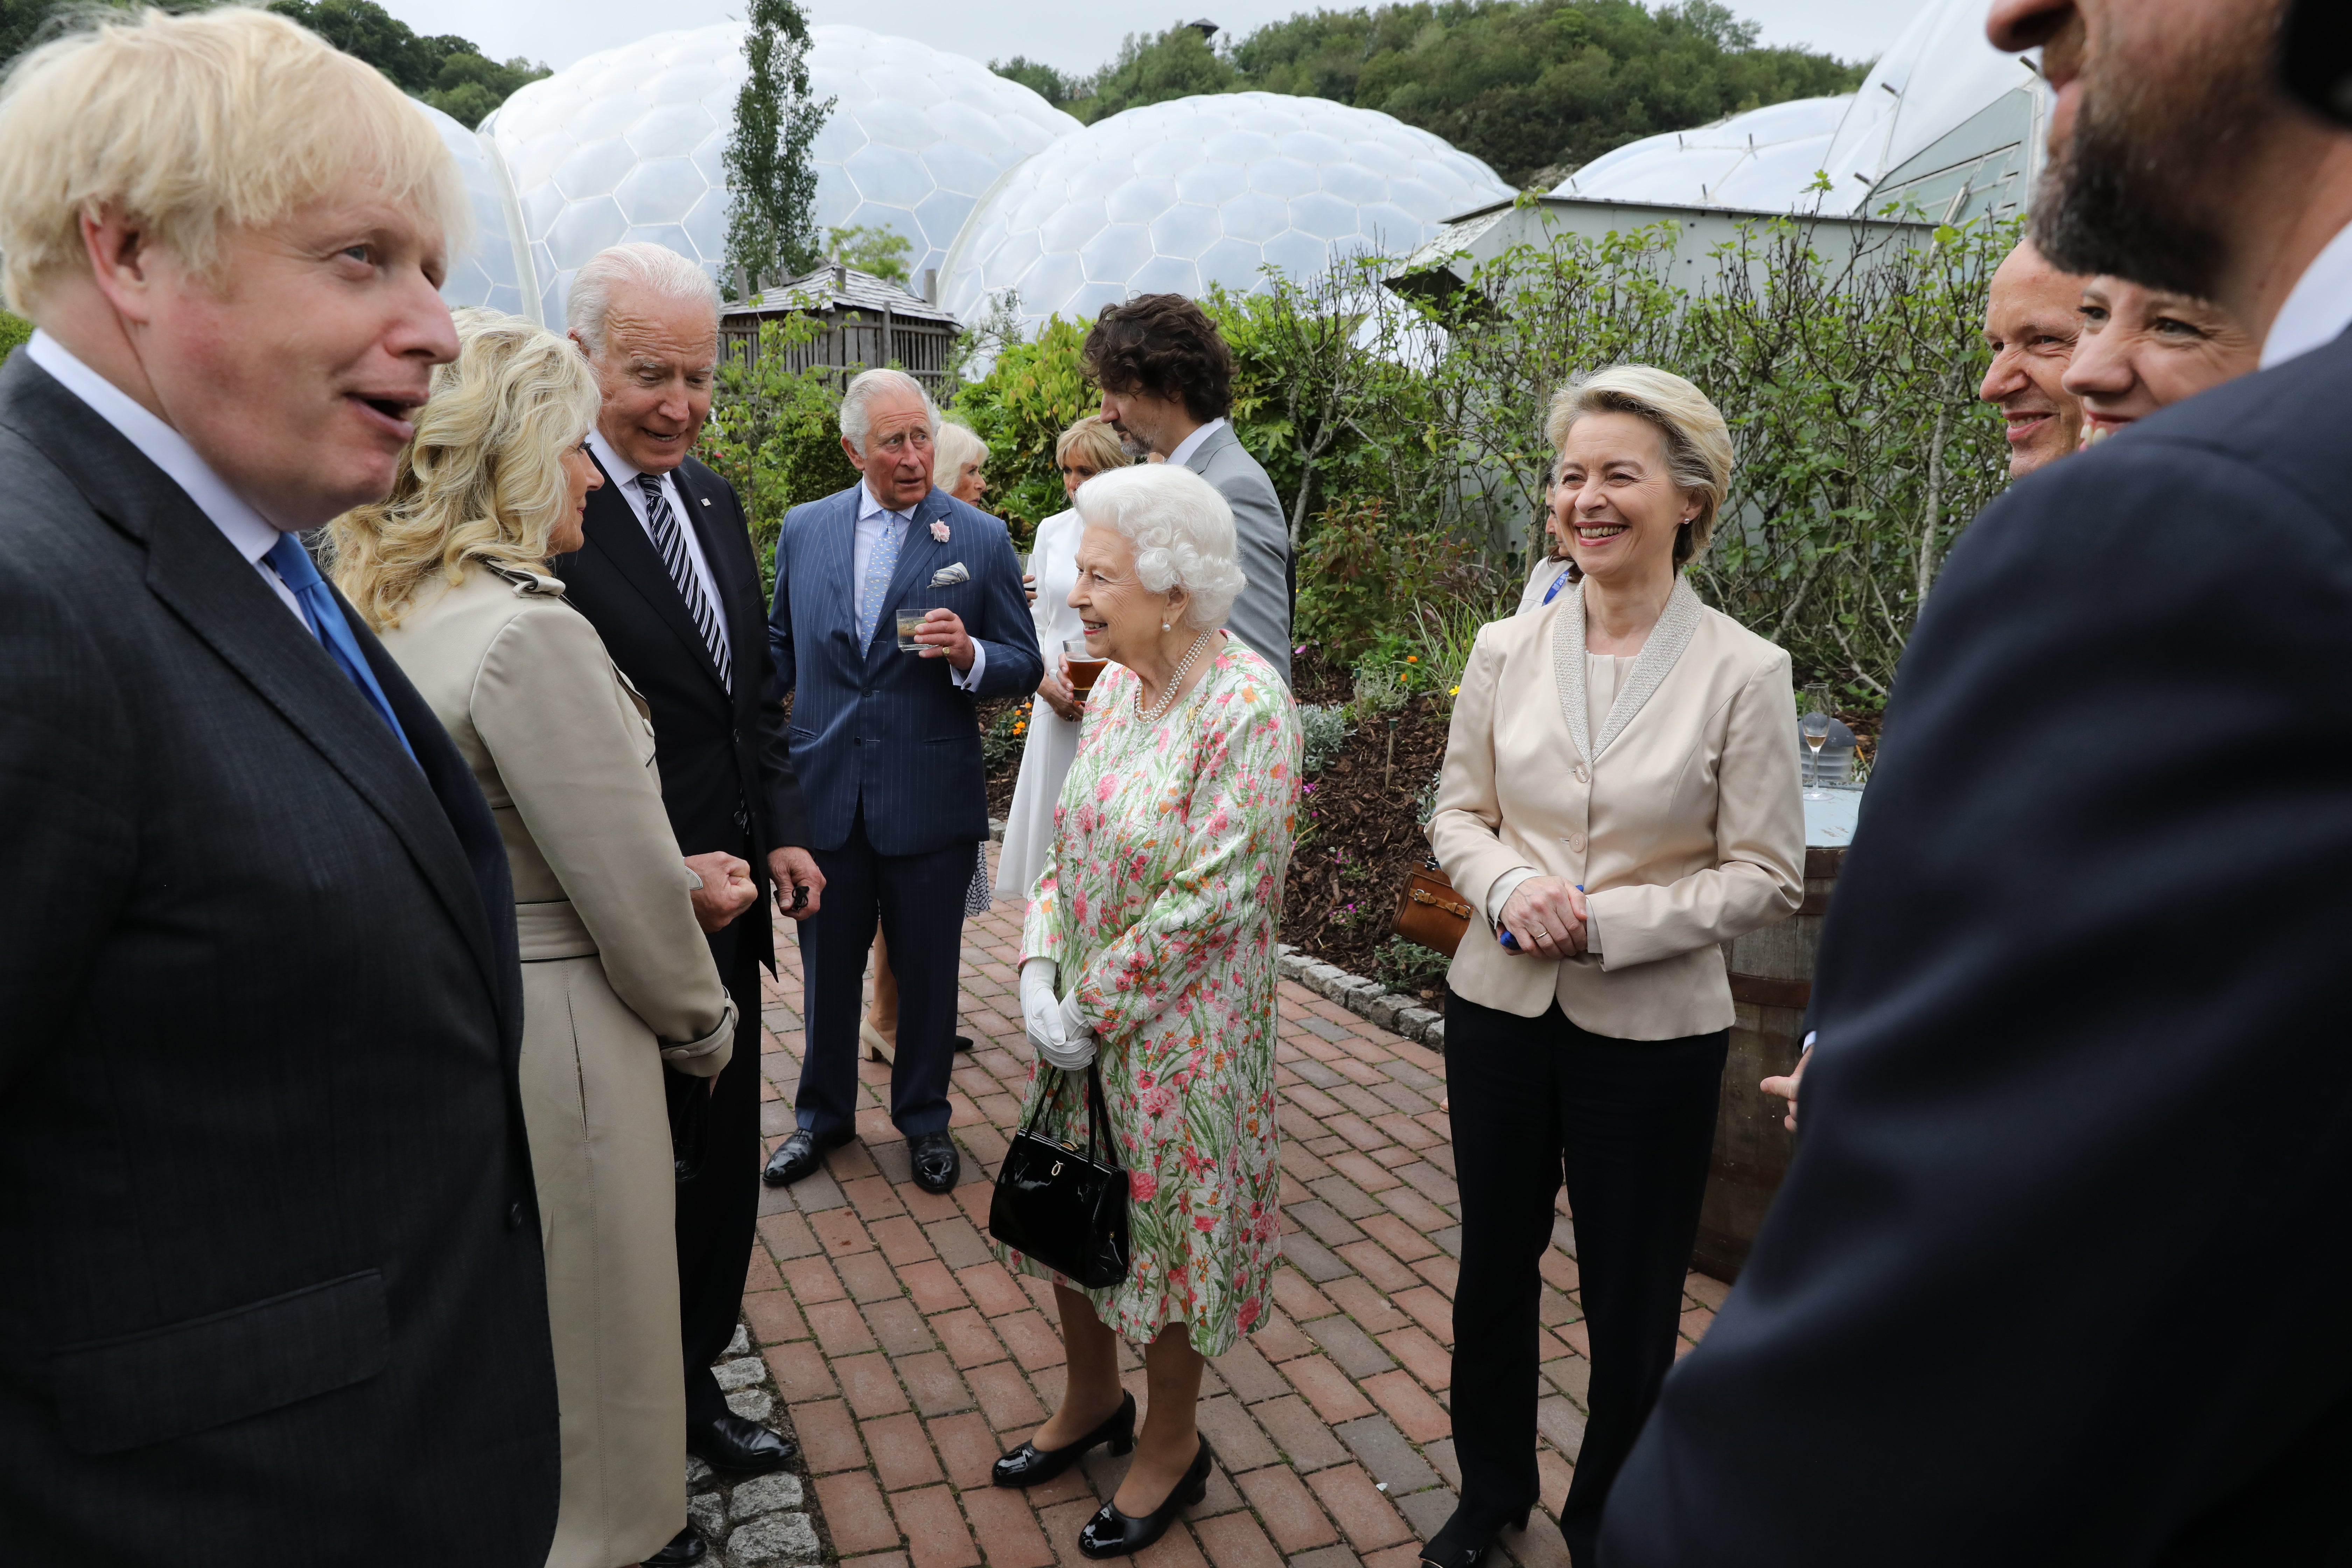 The Queen speaks to US President Joe Biden and his wife Jill at the Eden Project reception with Boris Johnson during the 2021 G7 summit (Jack Hill/The Times/PA)